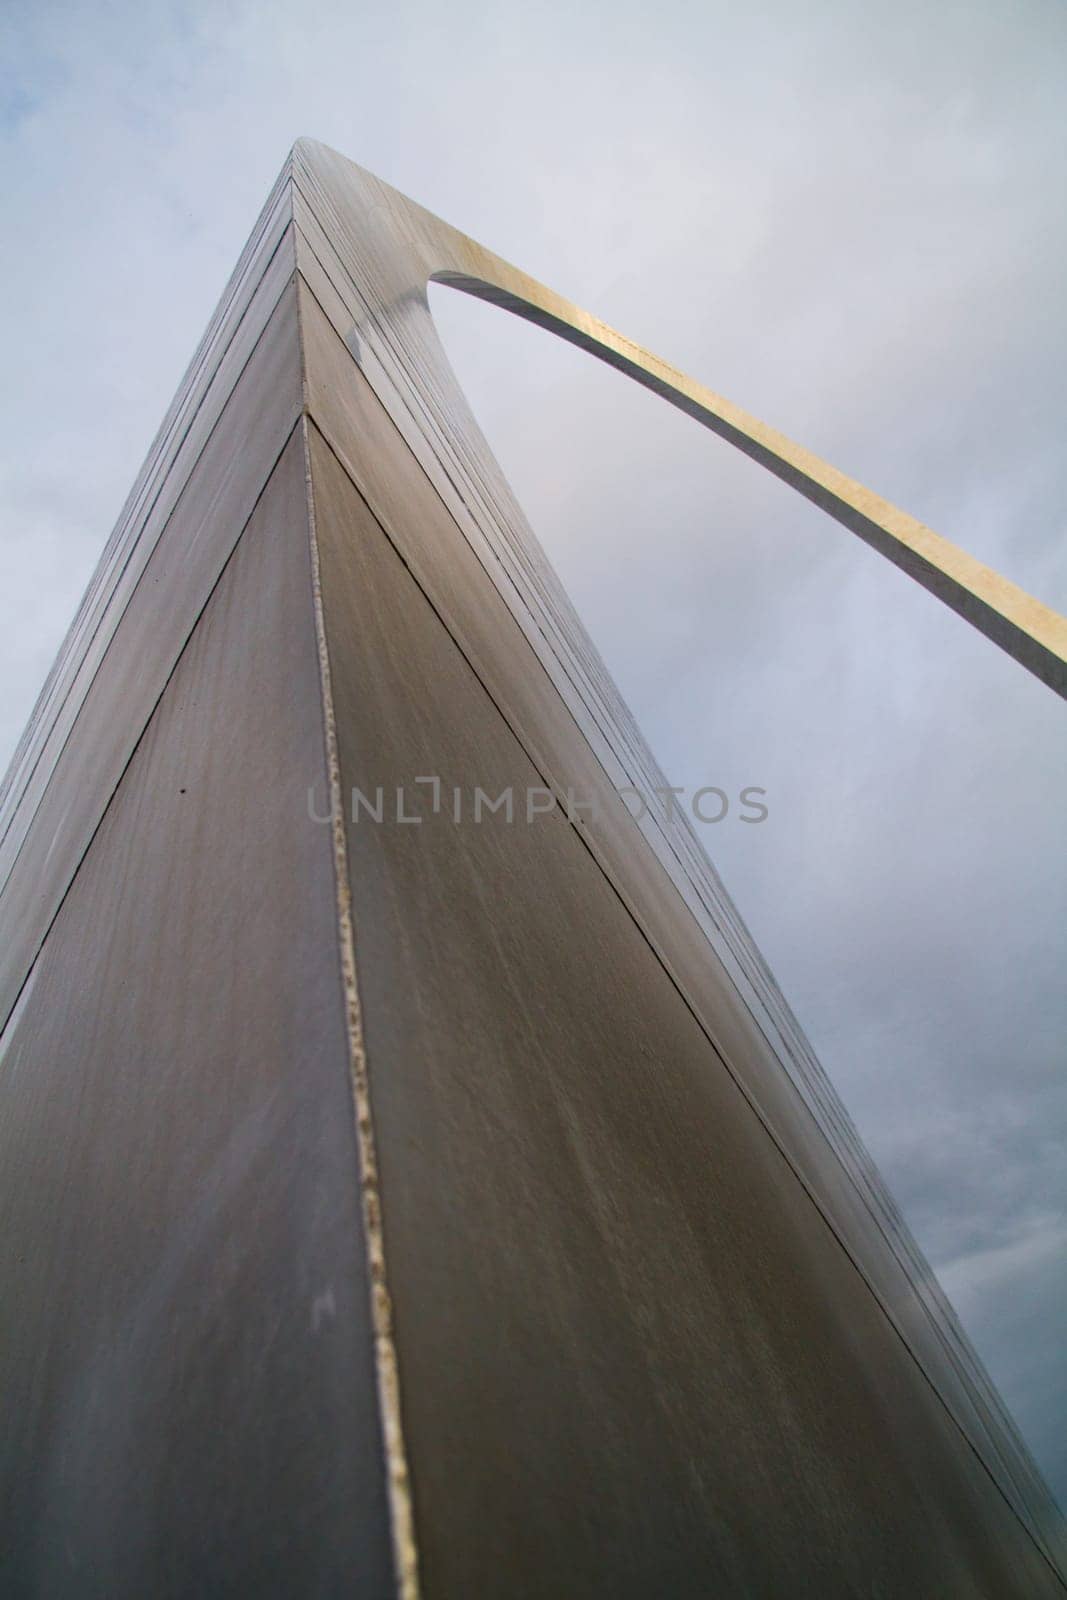 Stainless Steel Ascension - Low Angle View of St. Louis Arch by njproductions